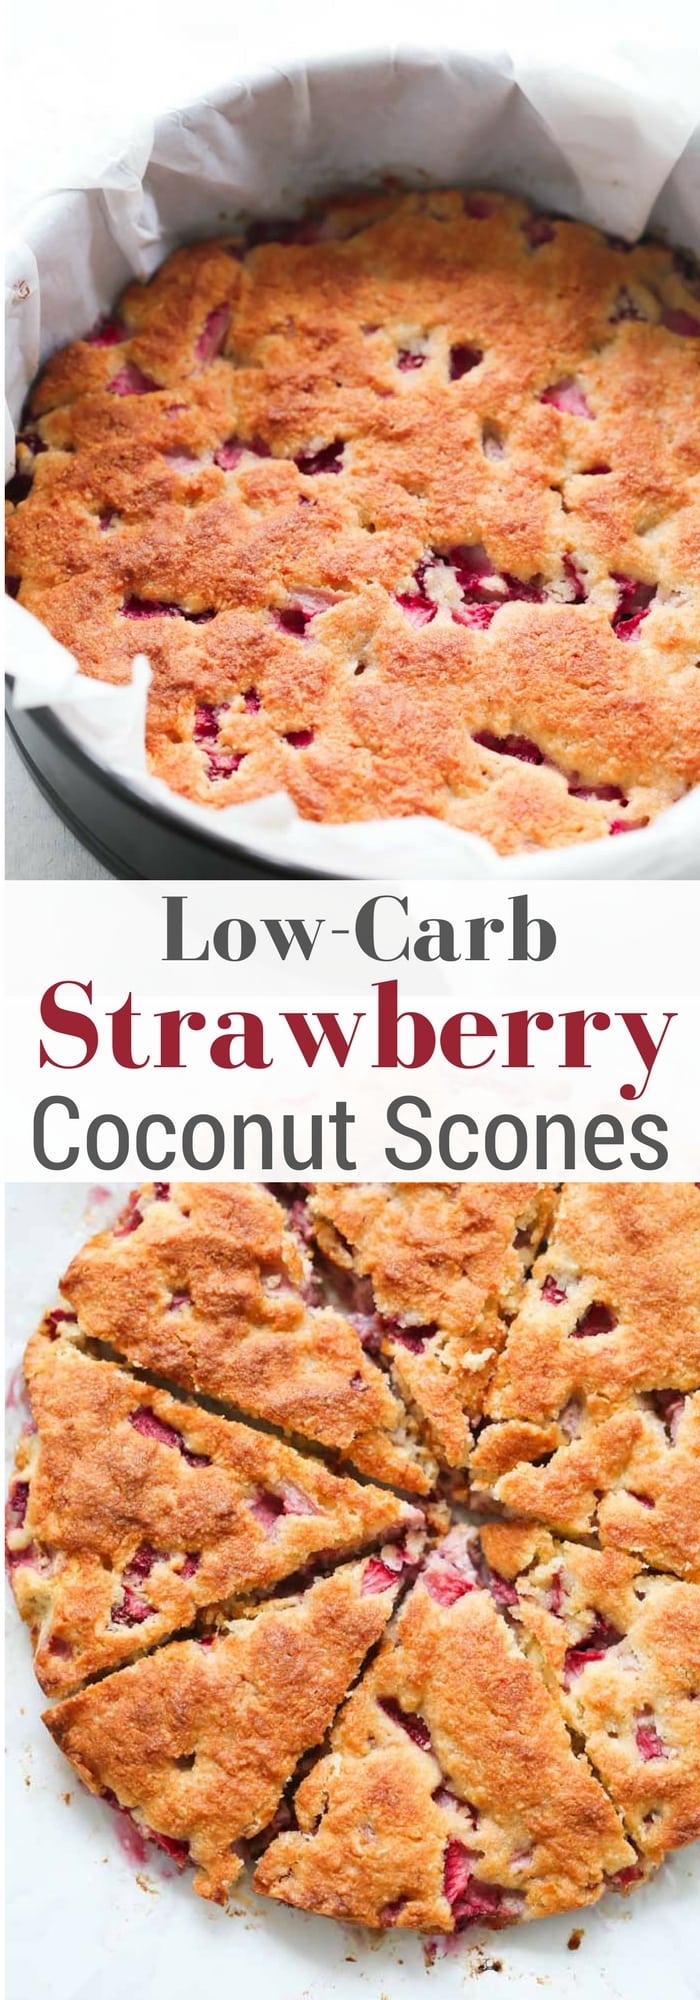 Low-carb Strawberry Coconut Scones - These Low-carb Strawberry Coconut Scones are gluten-free and made with almond flour, shredded coconut and fresh juicy strawberries.